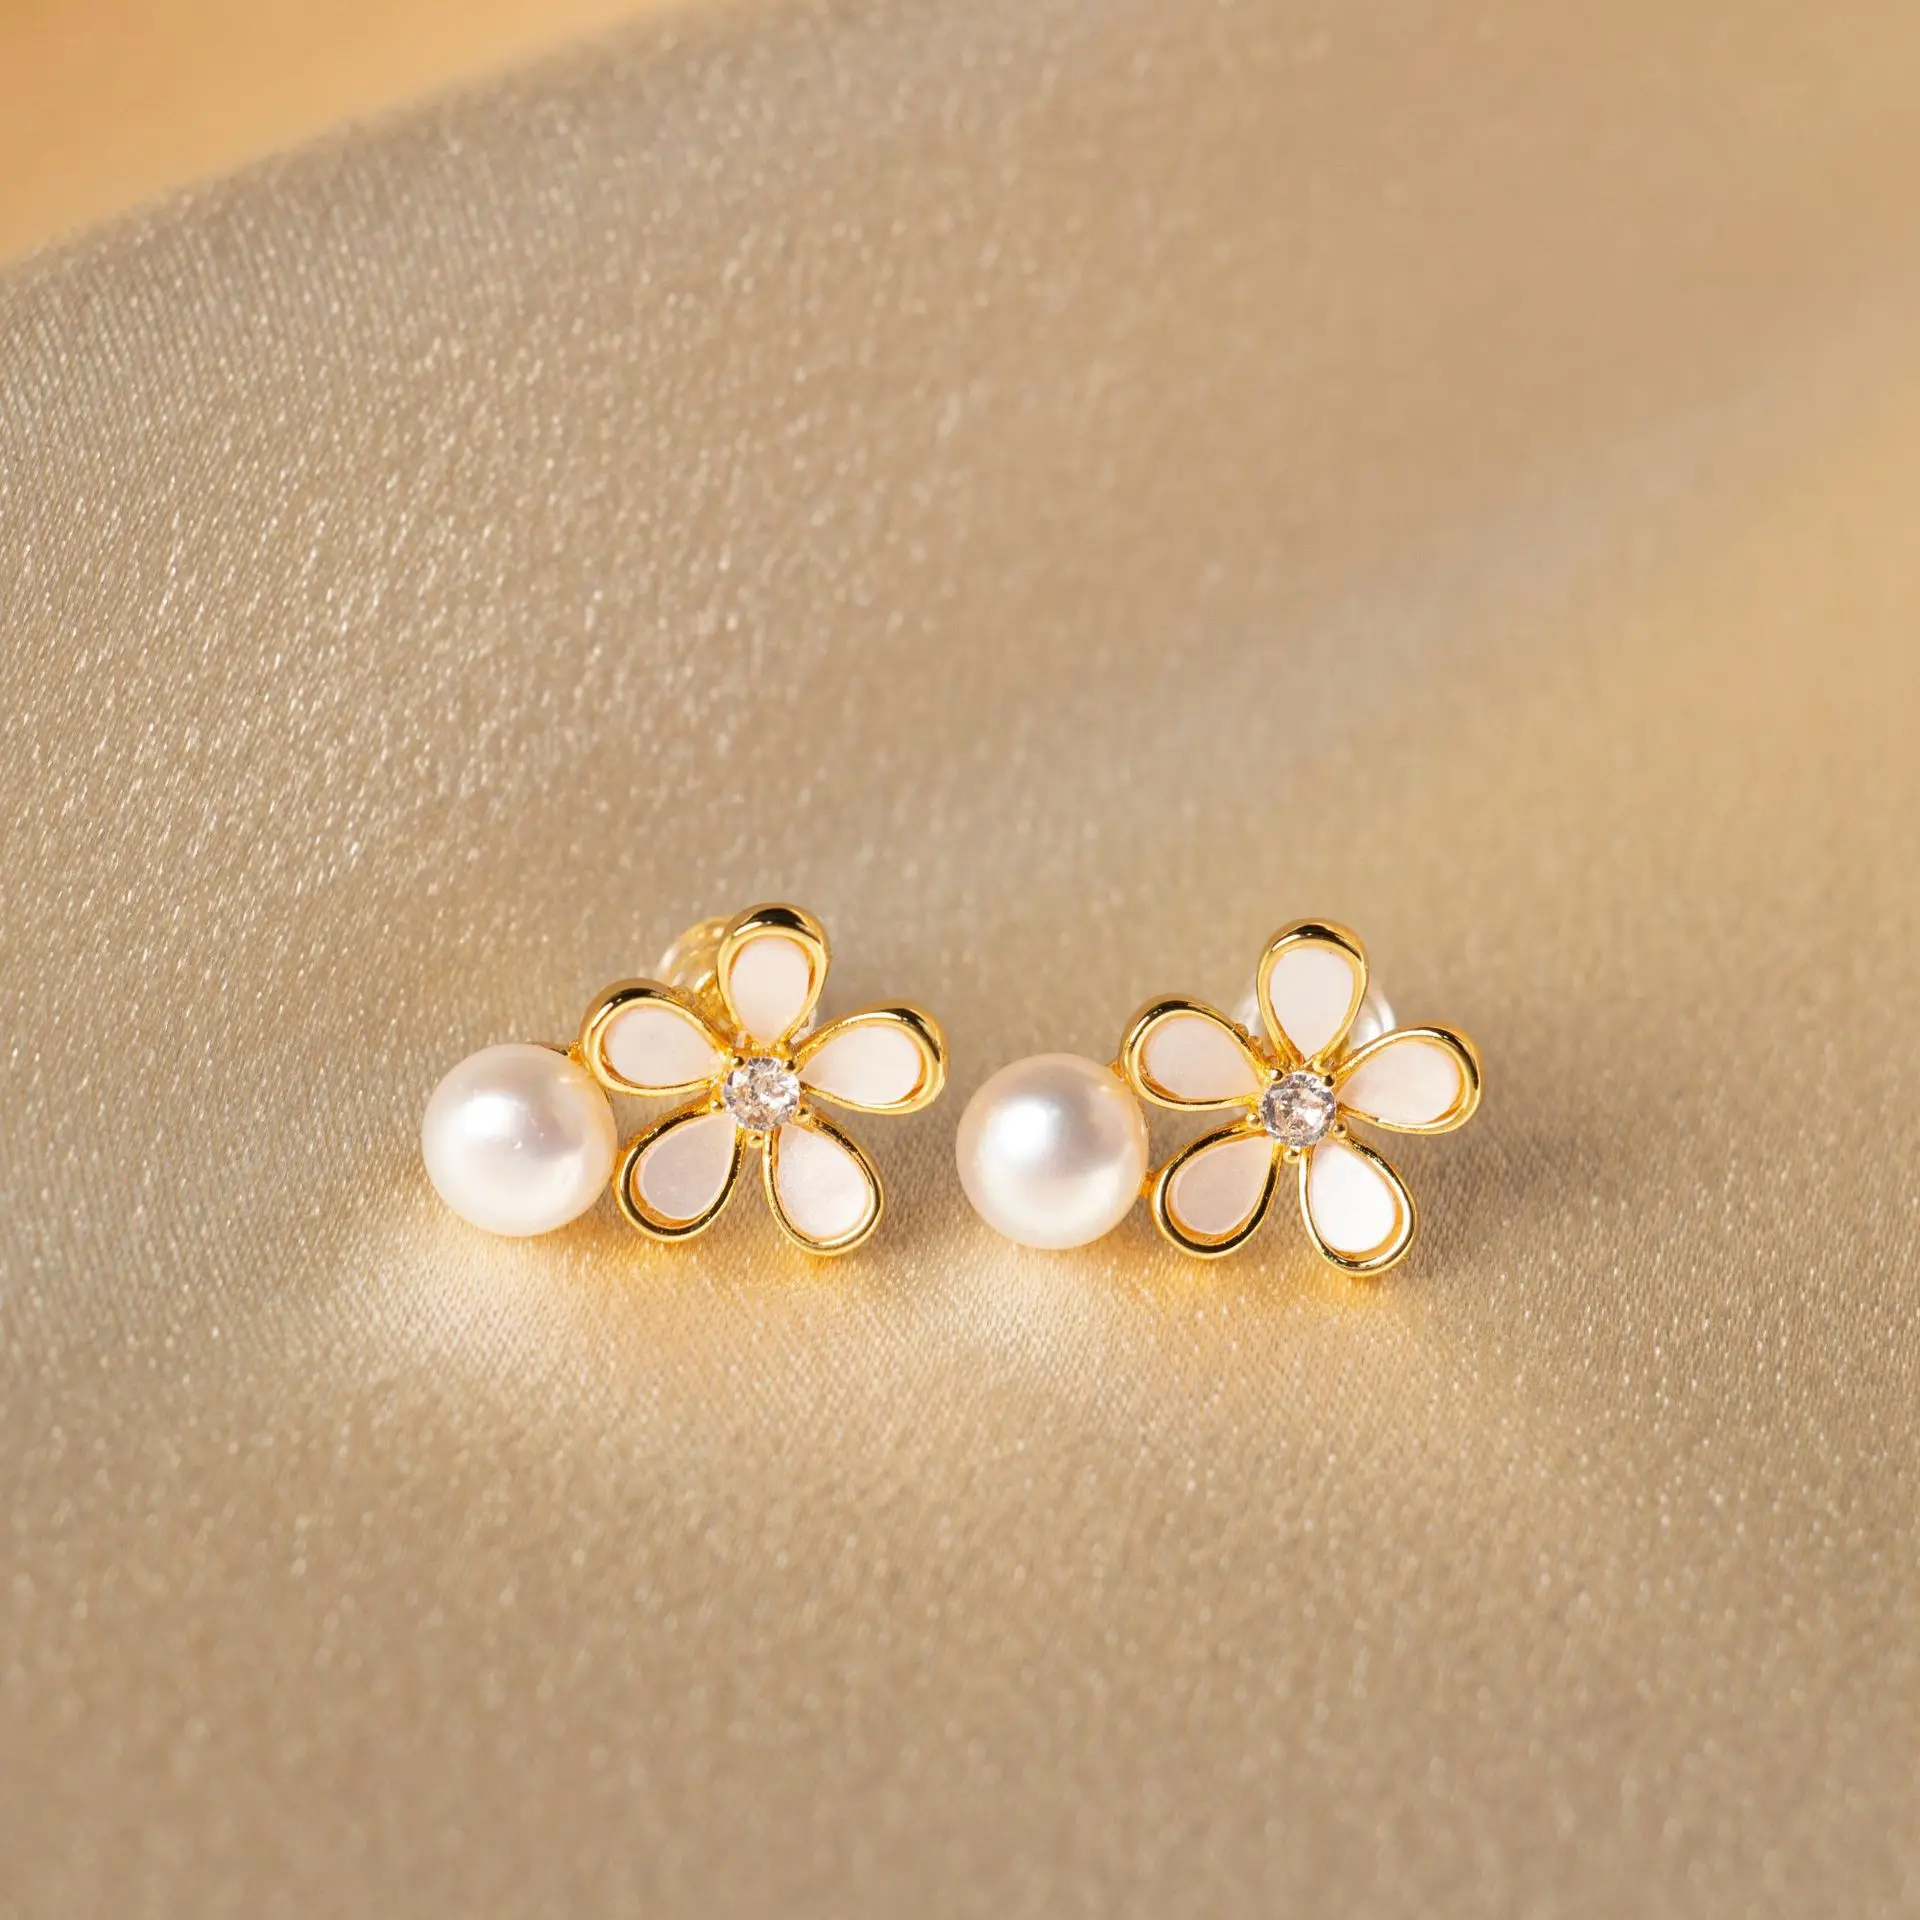 

New 14K Gold Filled Sweet Fashion Flower Design Natural Freshwater Pearl Ladies Stud Earrings Jewelry For Women Anti Allergy